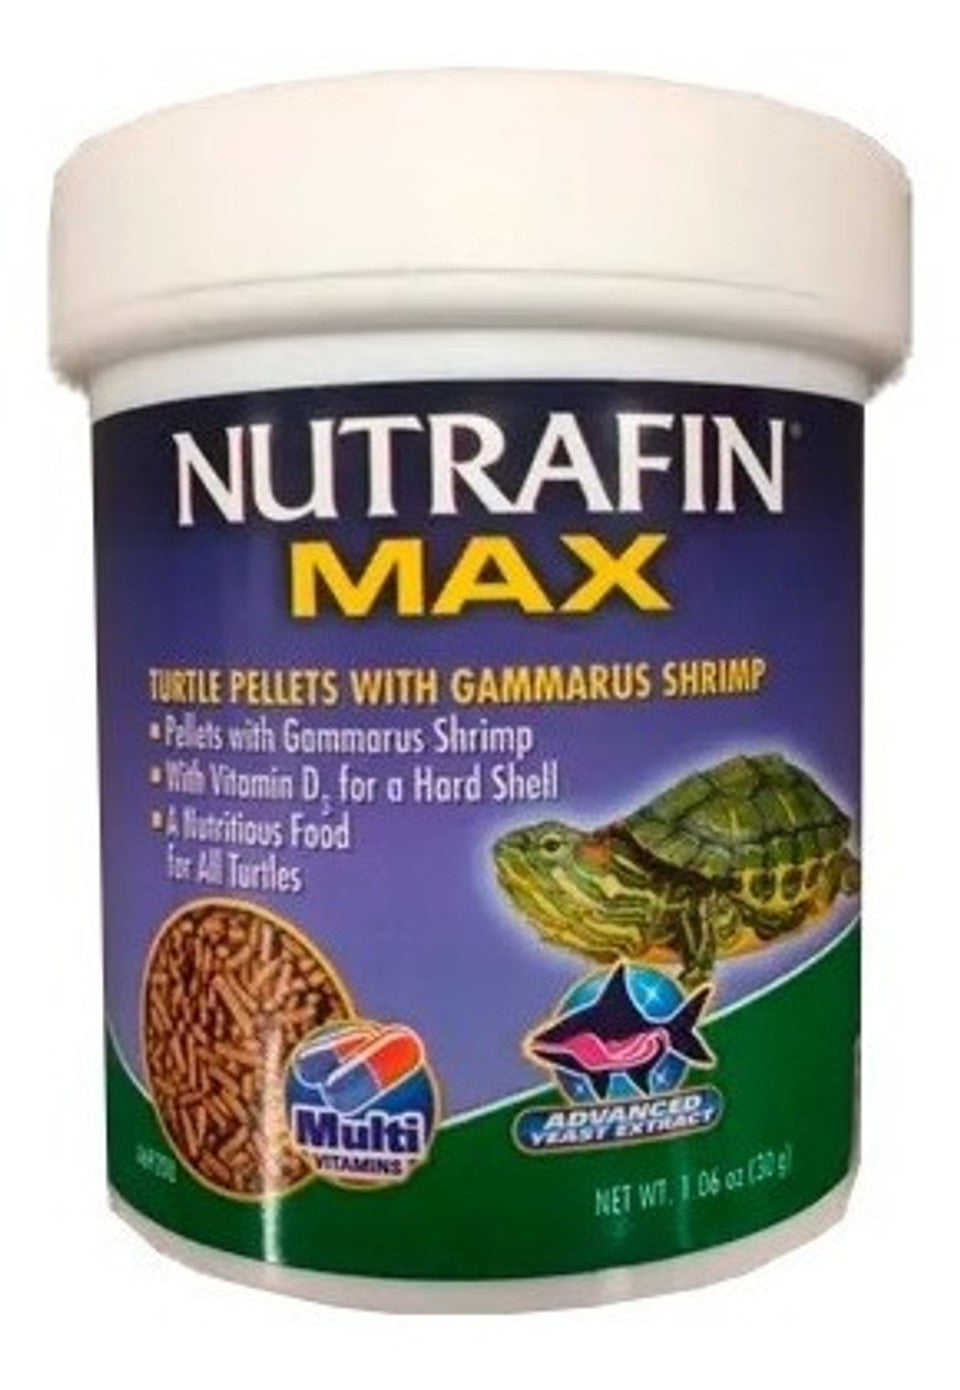 Nutrafin Max Turtle Pellets With Gammarus Shrimp - 30 g